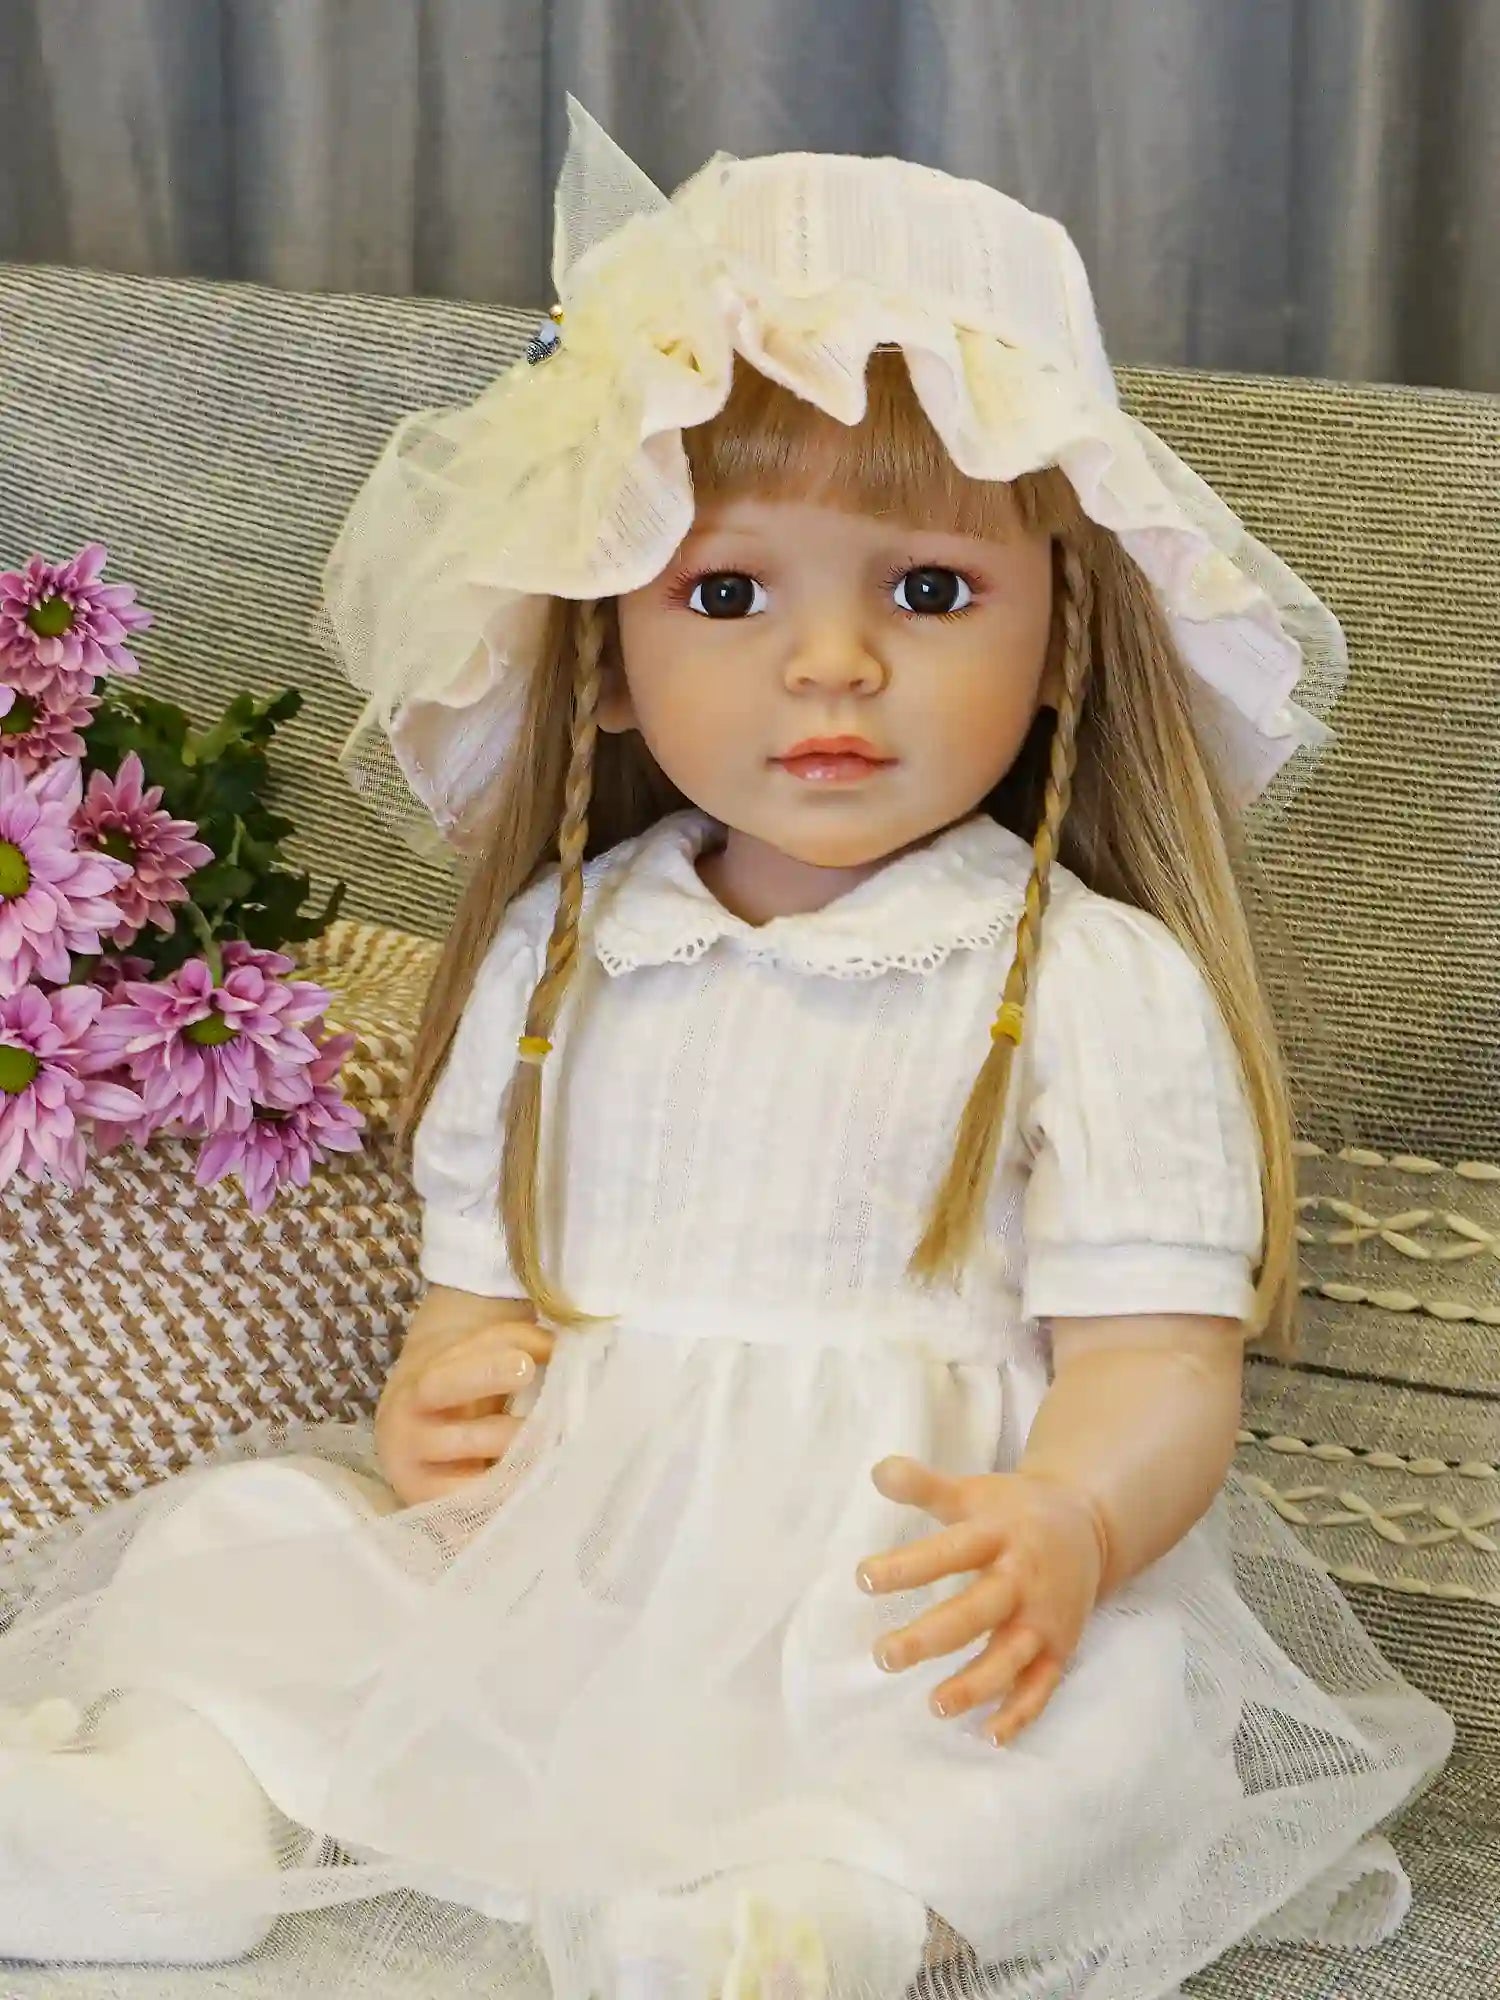 Realistic doll with long hair and a yellow bonnet, holding a flower, on a woven chair.